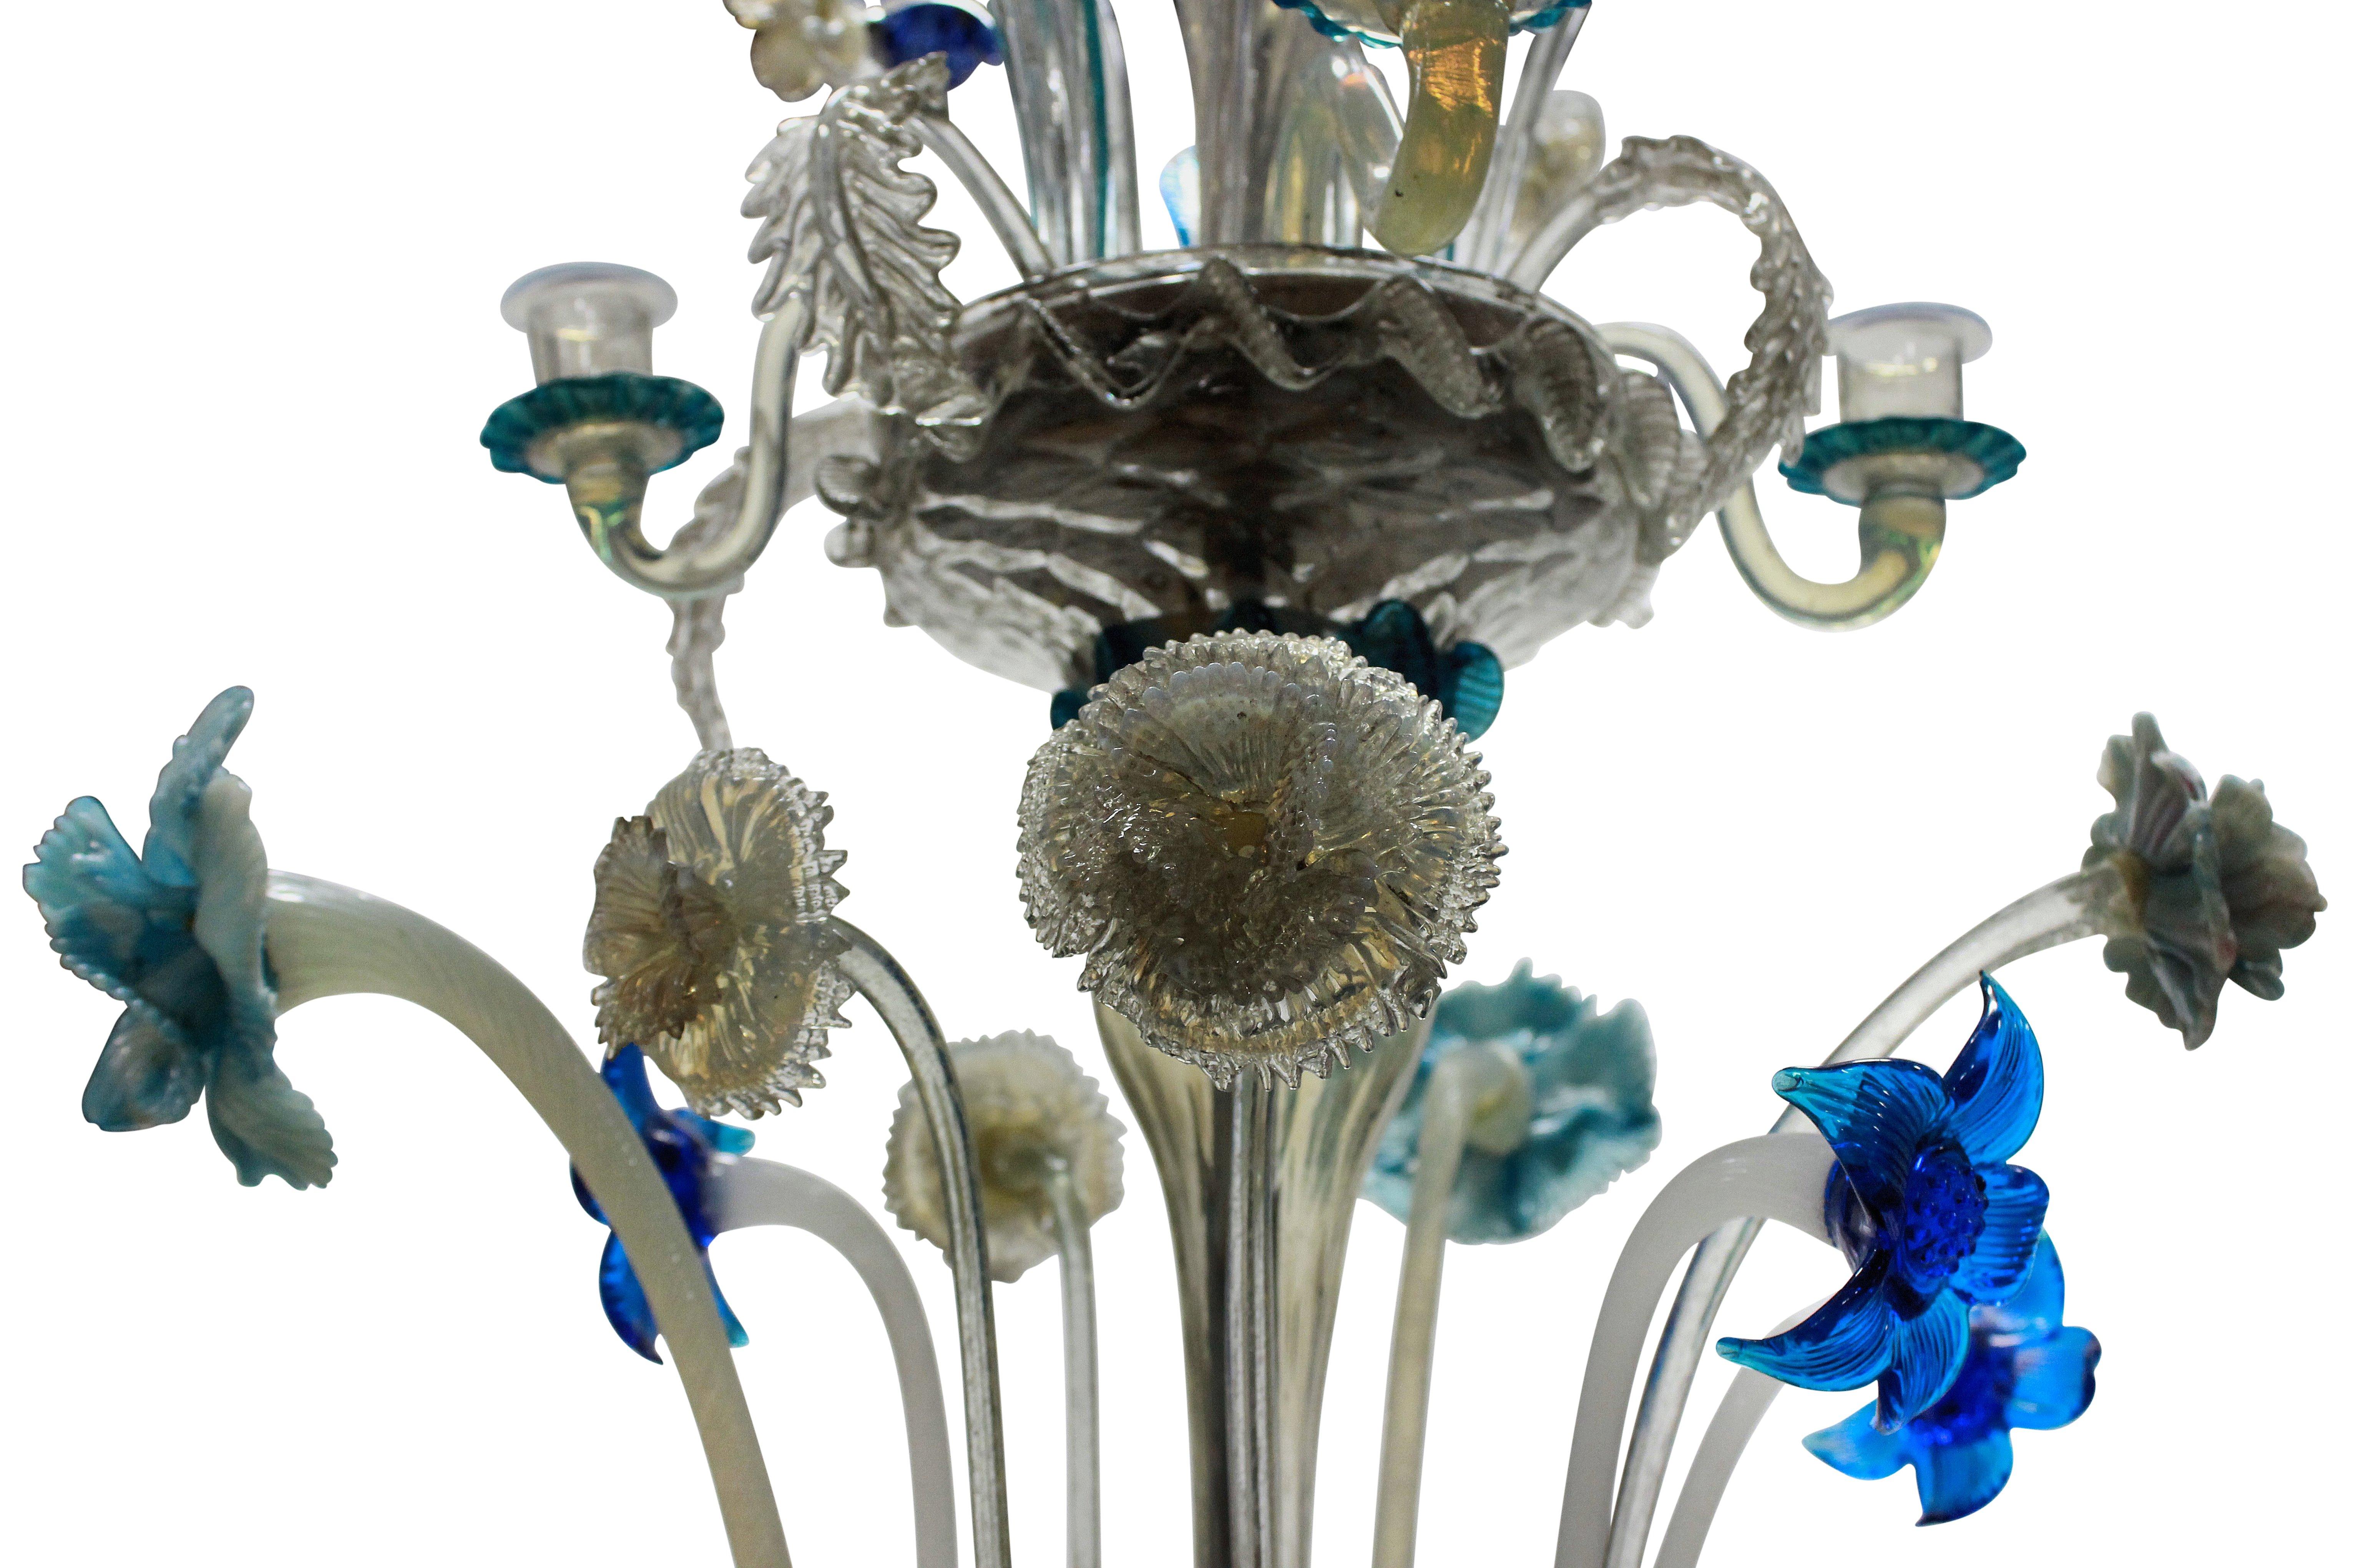 A pretty Murano glass chandelier in various shades of blue. Profusely decorated with hand blown glass flowers. There are historic repairs and nibbles to some flowers, typical of Murano chandeliers of this age.